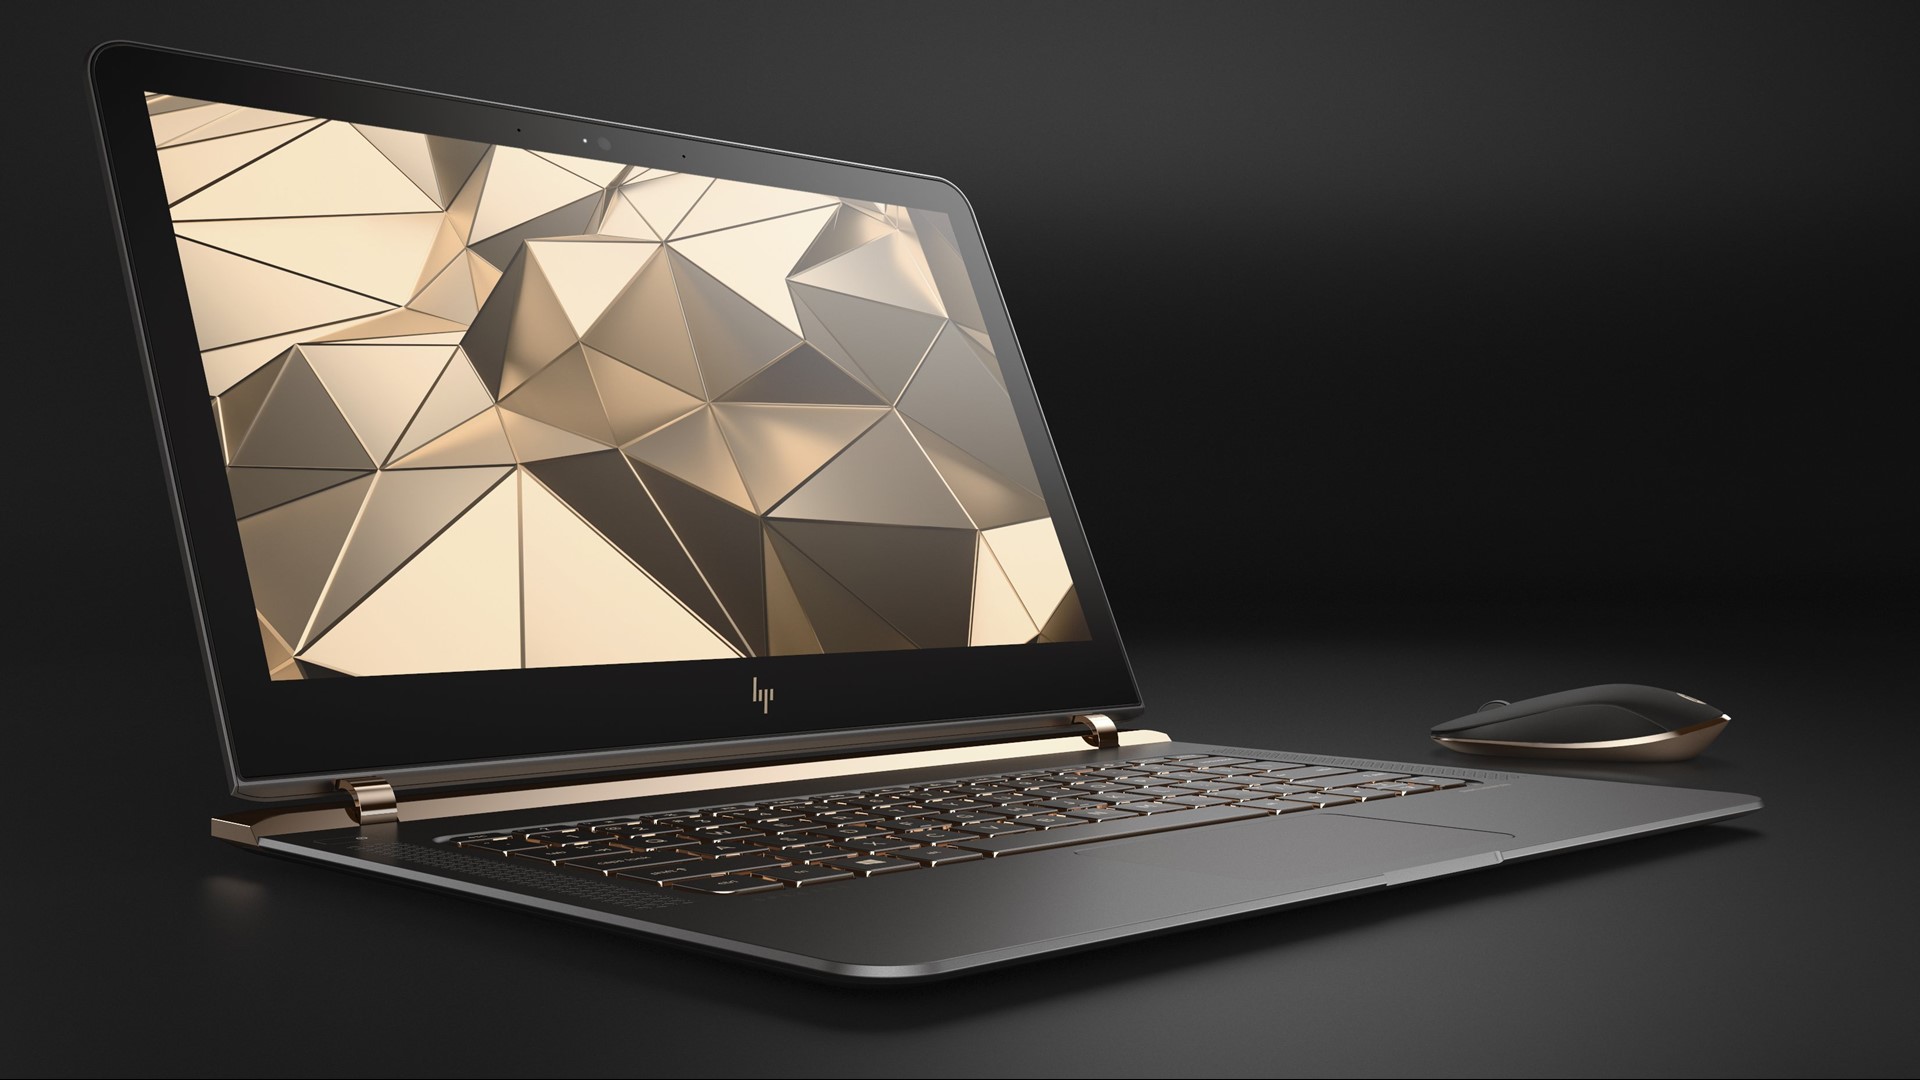 HP unveils the world’s thinnest laptop